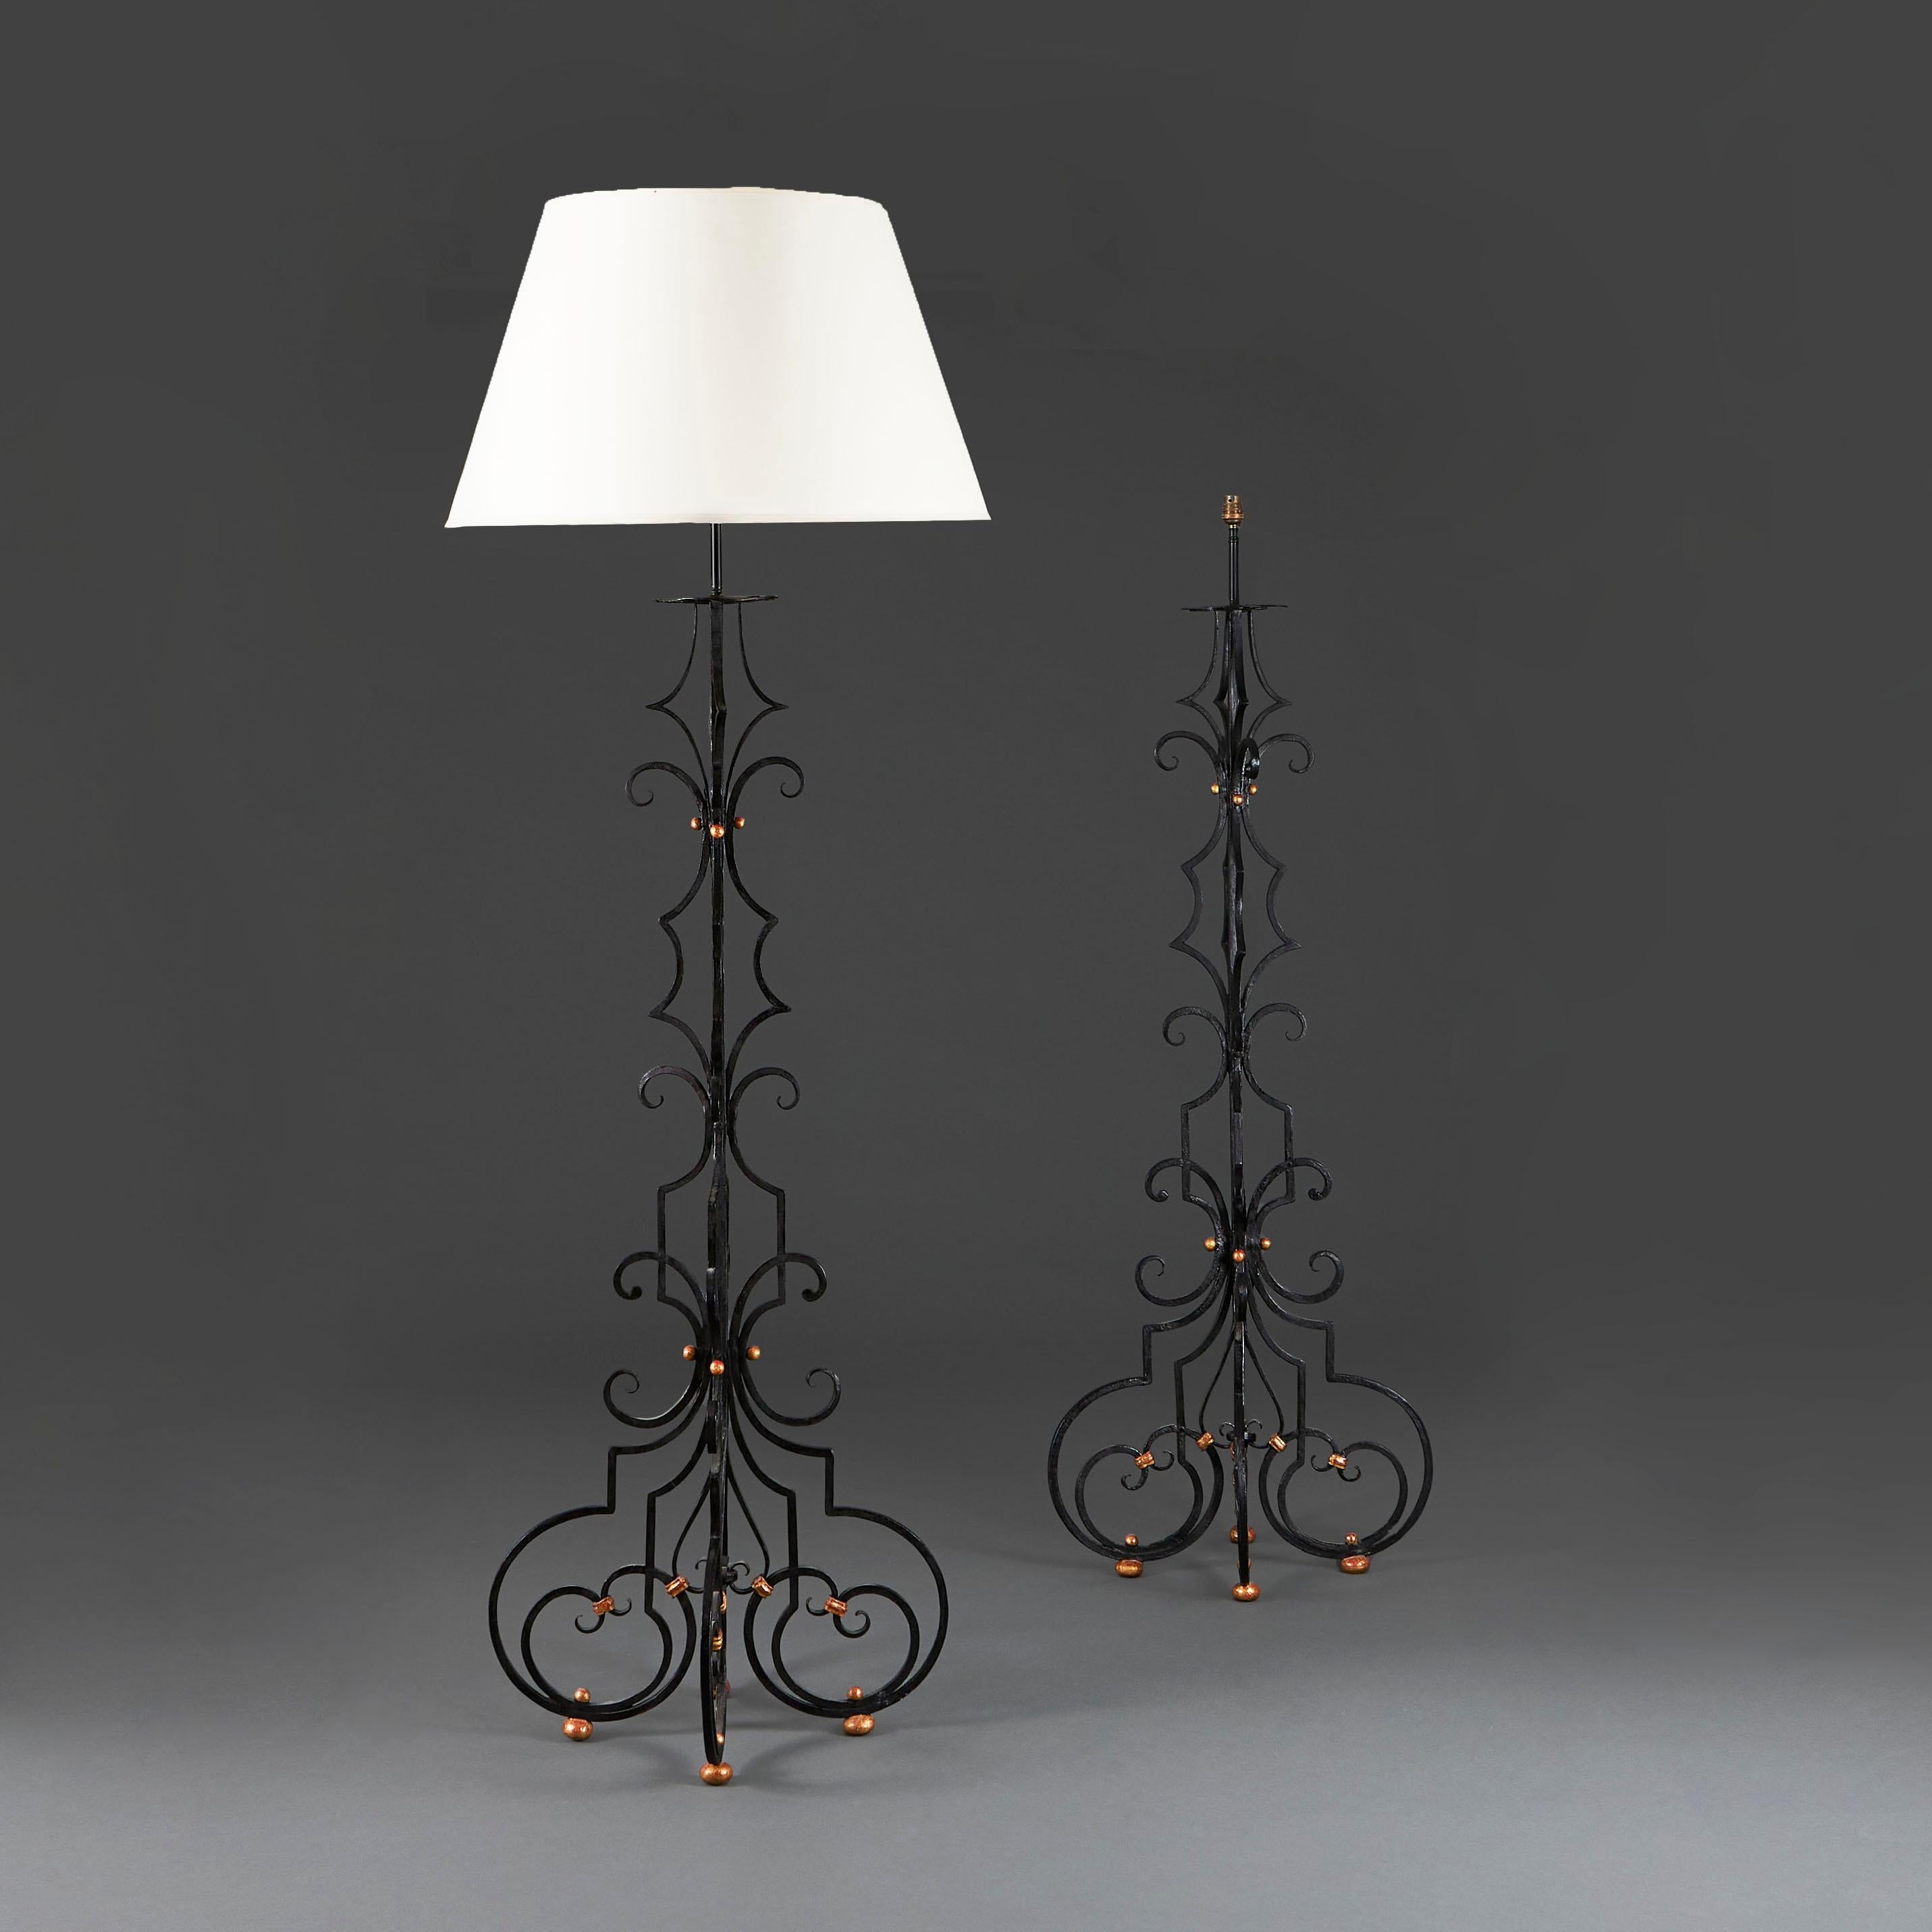 Spain, circa 1890

A pair of late nineteenth century wrought iron ebonised standard lamps, with flared bottoms, gilded balls and foliate metalwork.

Height 147.00cm
Height with lampshade  185.00cm
Width of base  53.00cm